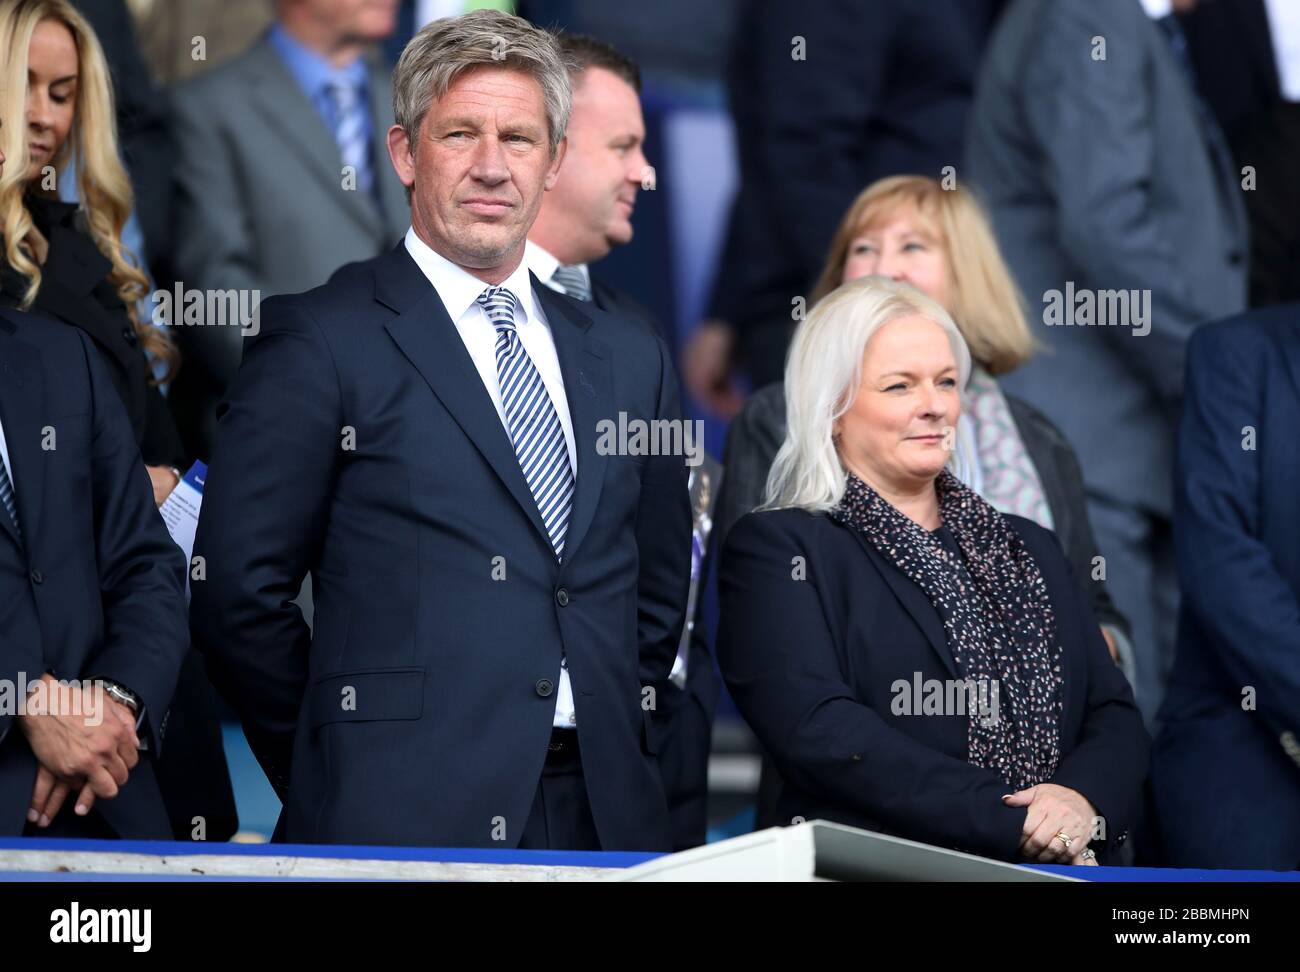 Marcel Brands - Everton Director of Football (left) Denise Barrett-Baxendale - Everton Chief Executive Officer (CEO) (right) Stock Photo